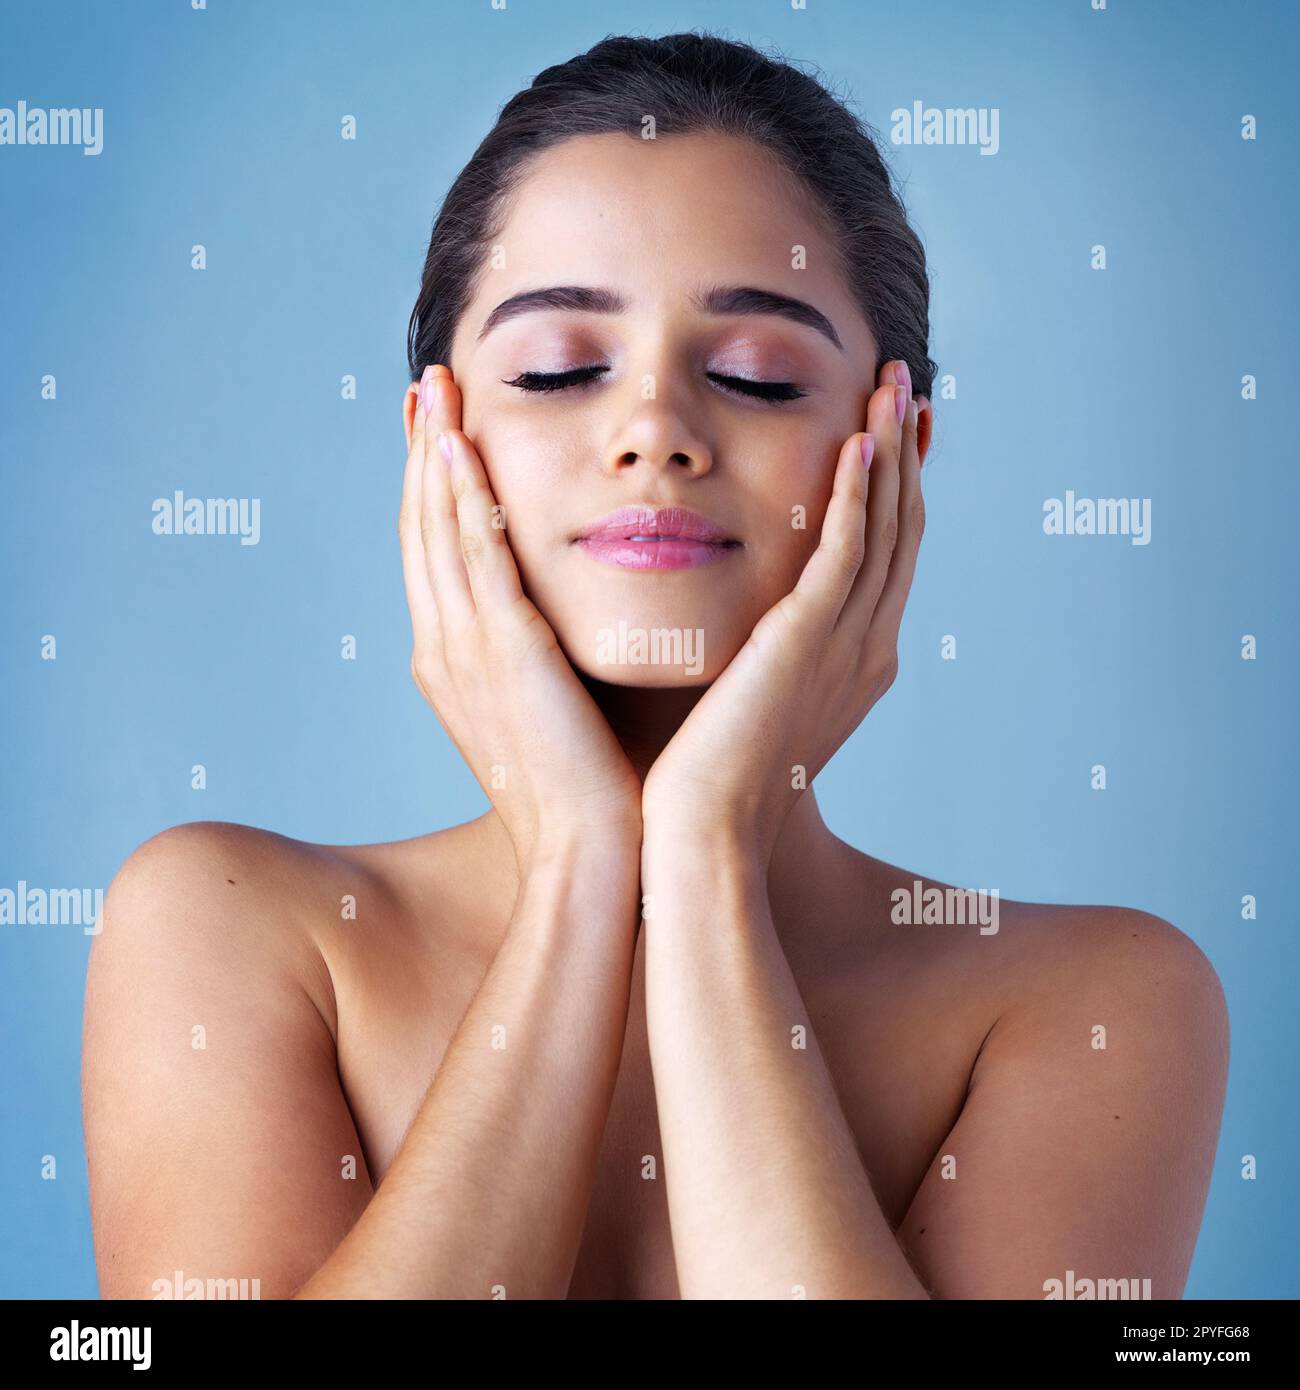 Shes in love with her new skincare regime. Studio shot of a beautiful young woman posing against a blue background. Stock Photo